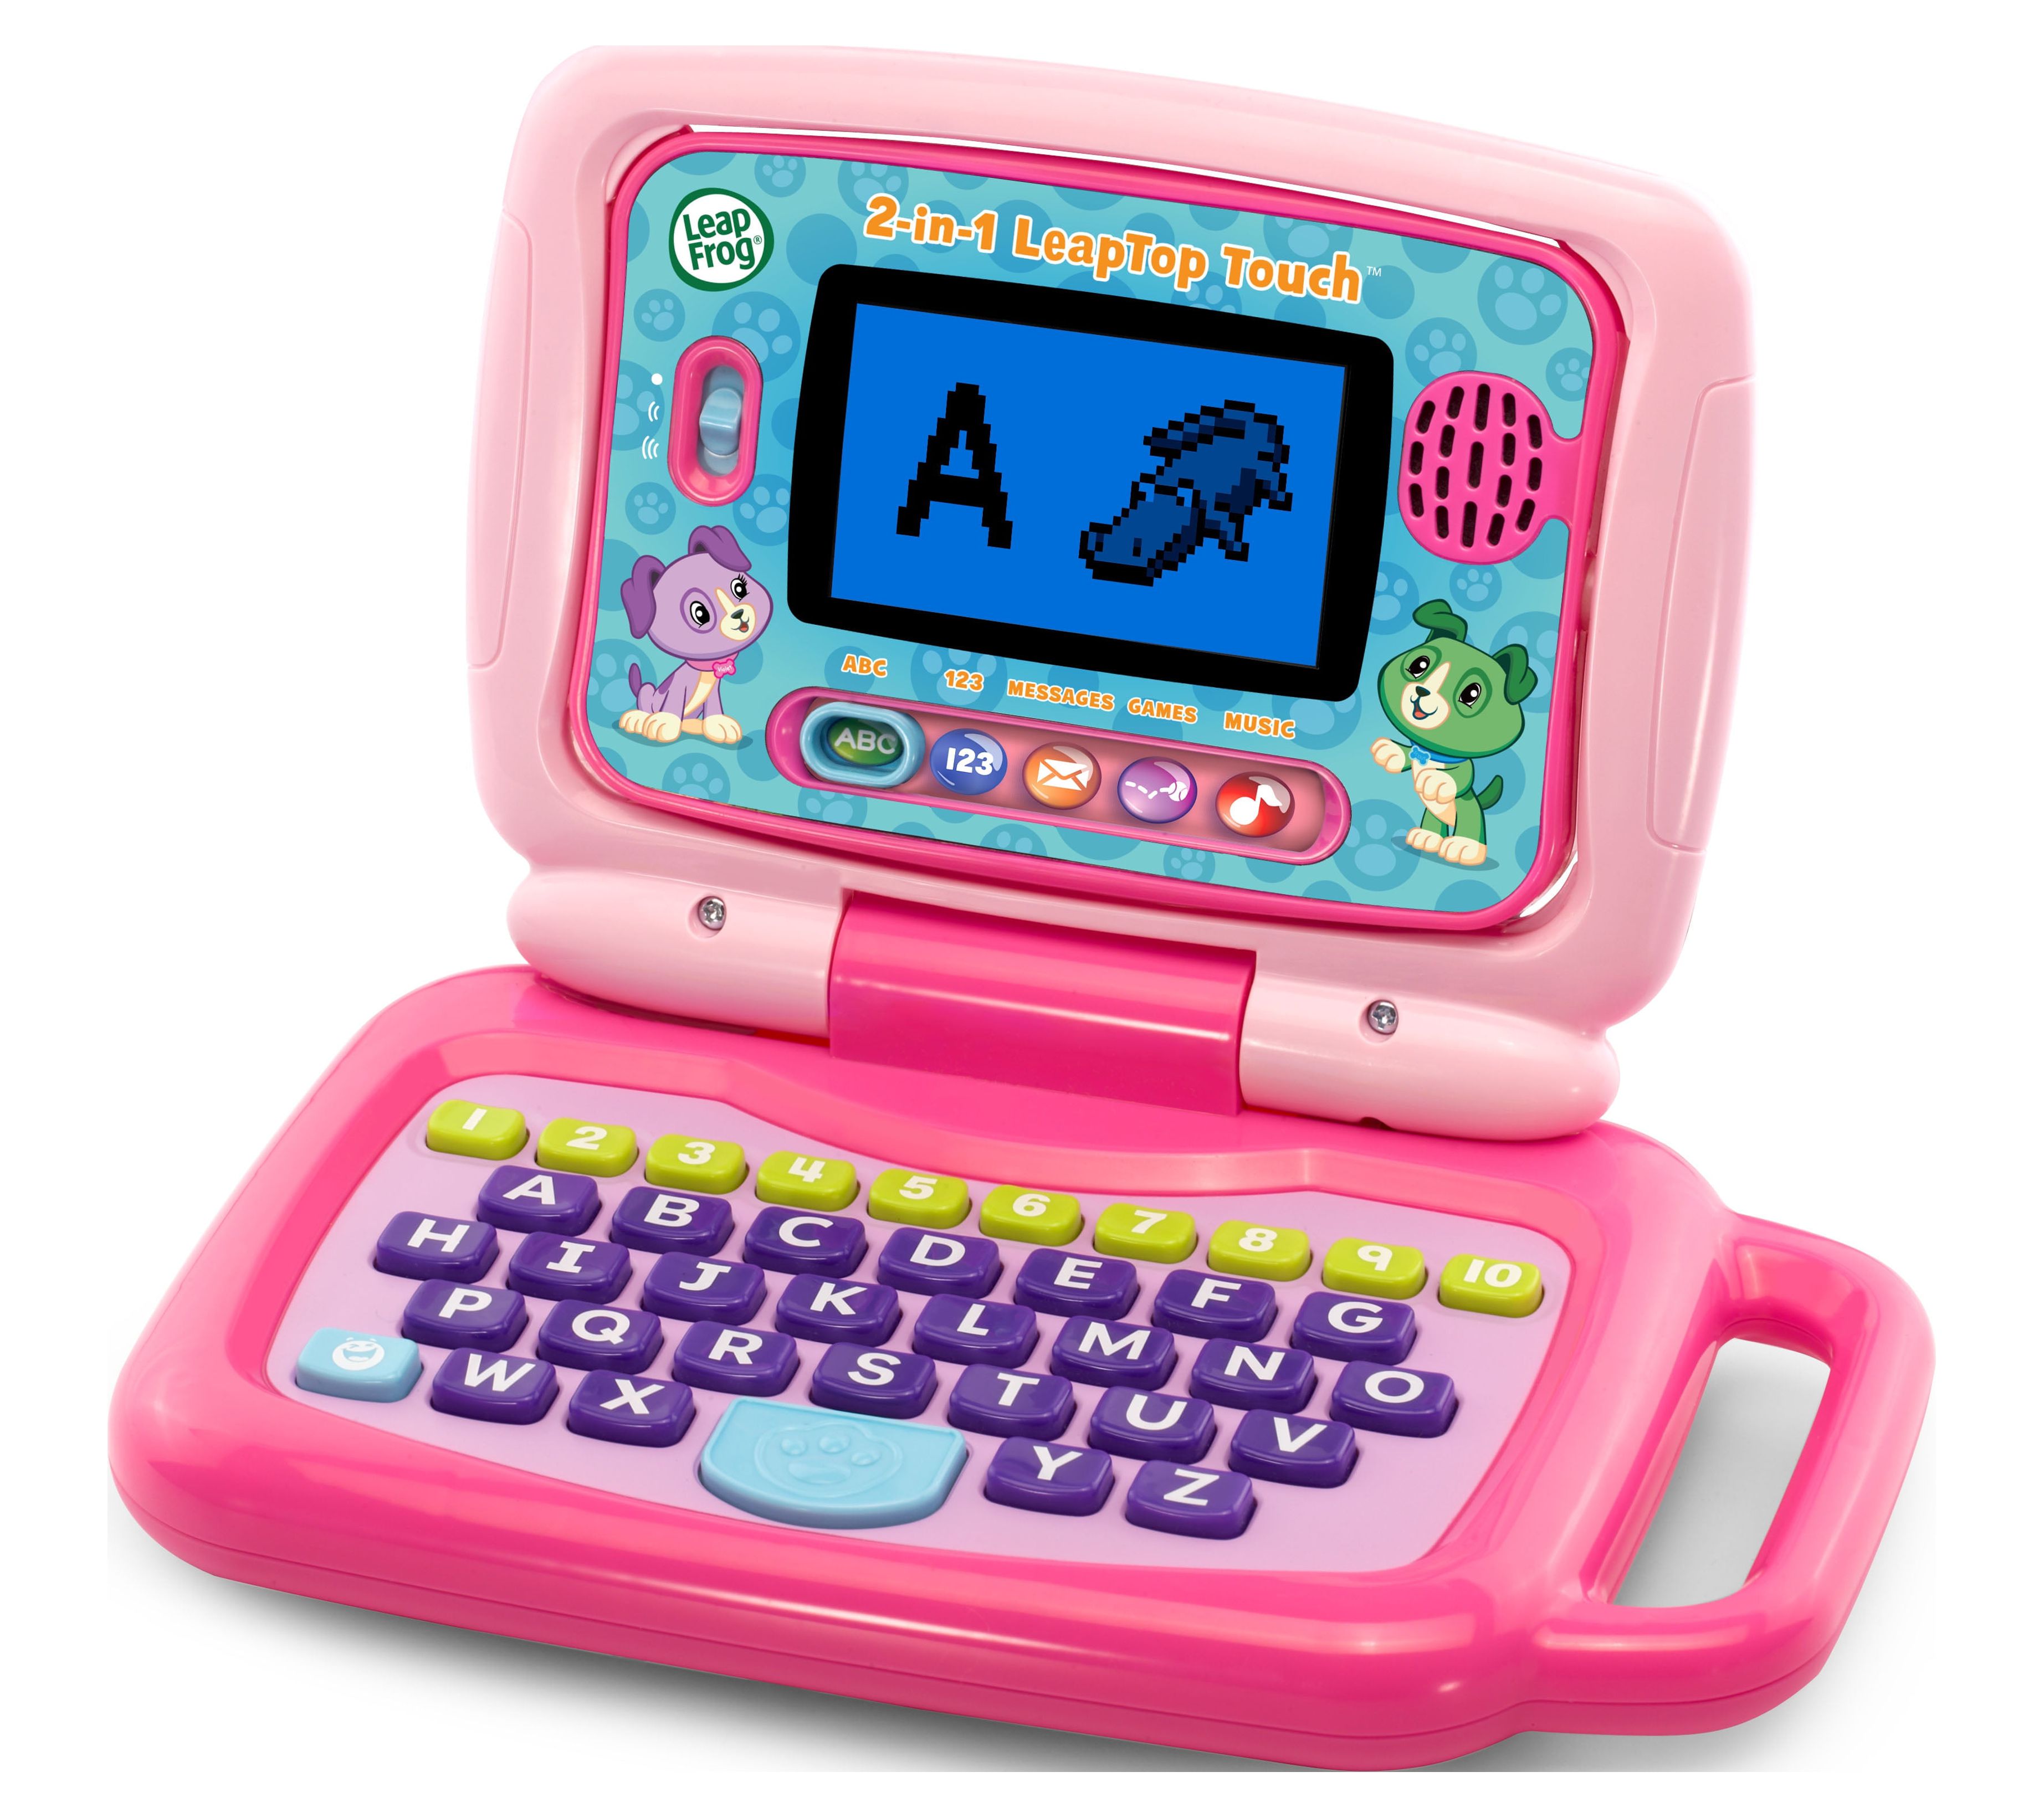 LeapFrog 2-in-1 LeapTop Touch for Toddlers, Electronic Learning System, Teaches Letters, Numbers - image 6 of 12